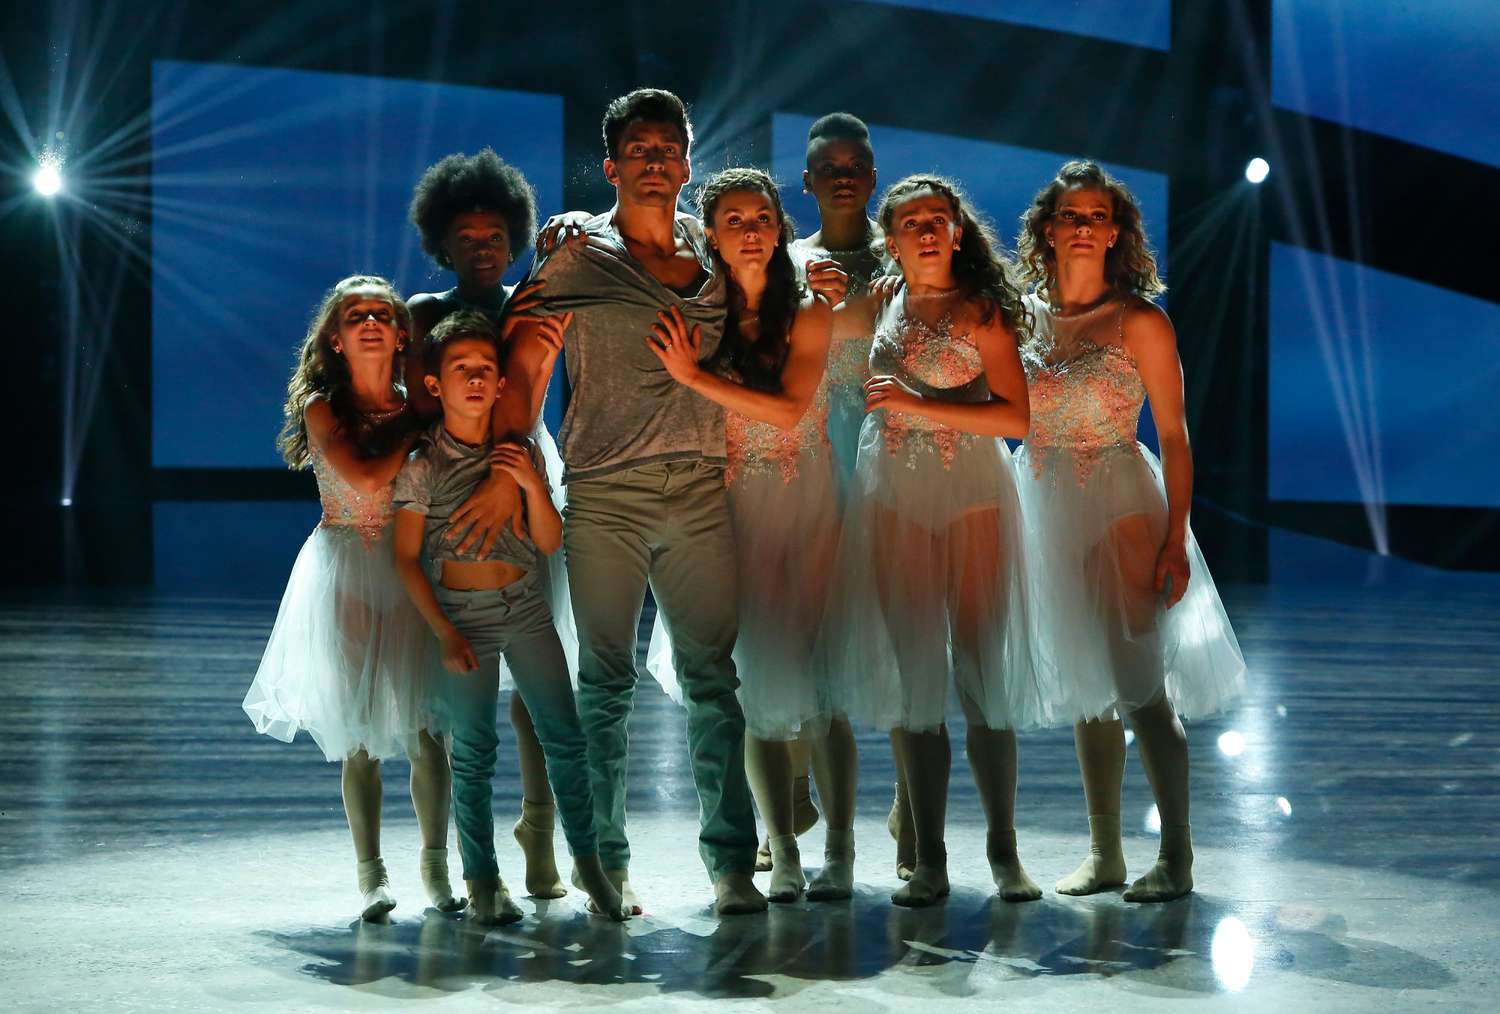 So You Think You Can Dance recap: The Next Generation: Top 10 Perform.